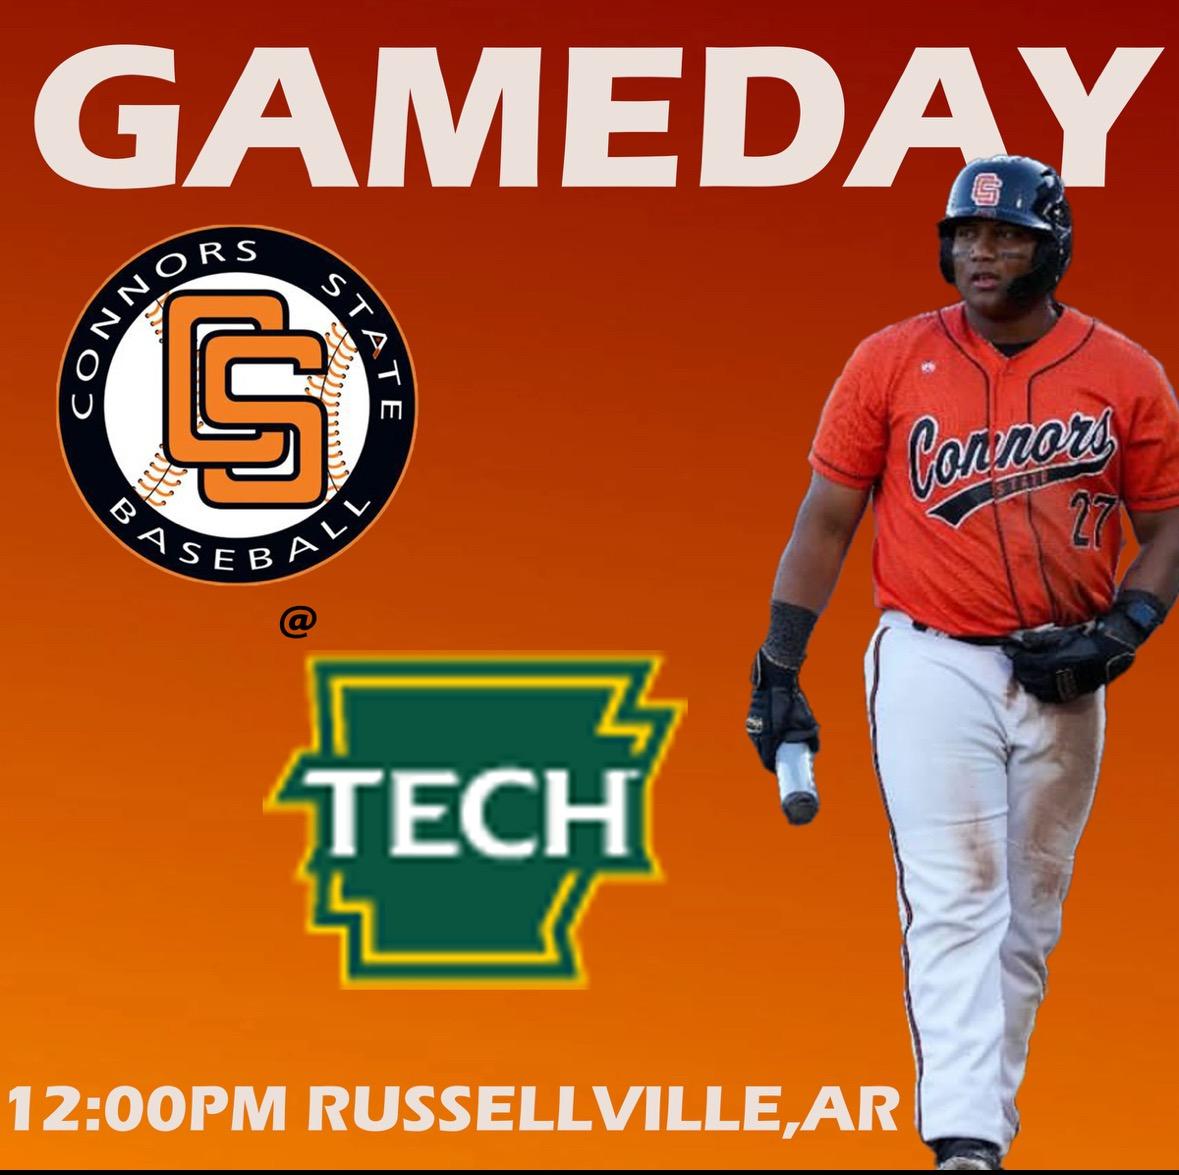 The Cowboys hit the road Wednesday and travel to Arkansas Tech first pitch at noon. Follow the action on GameChanger #OrangeNation